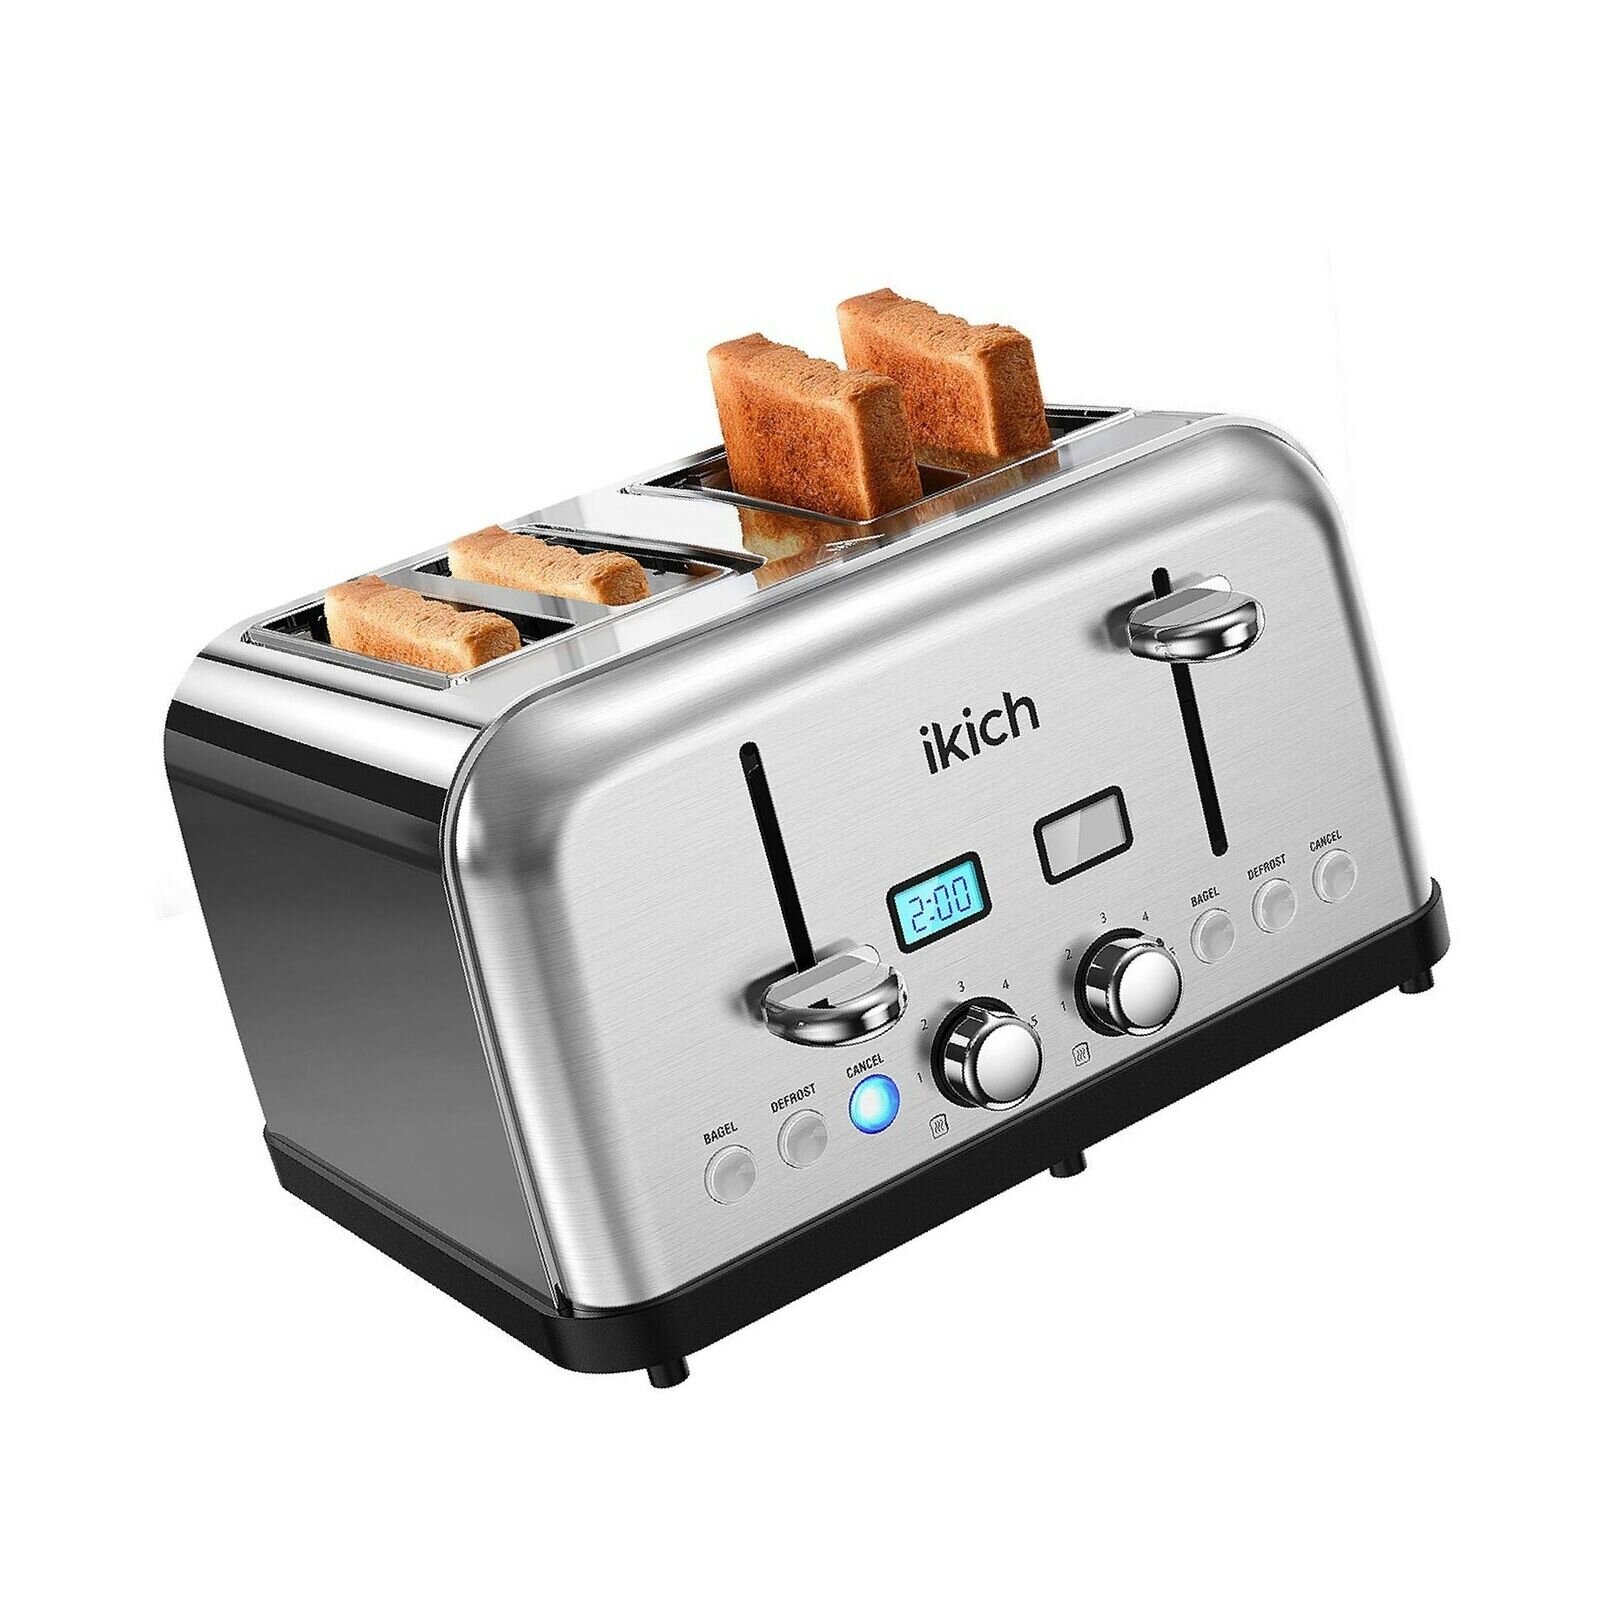 IKICH Black Toaster 4 Slice Long Slots Toaster for Slice Bread 